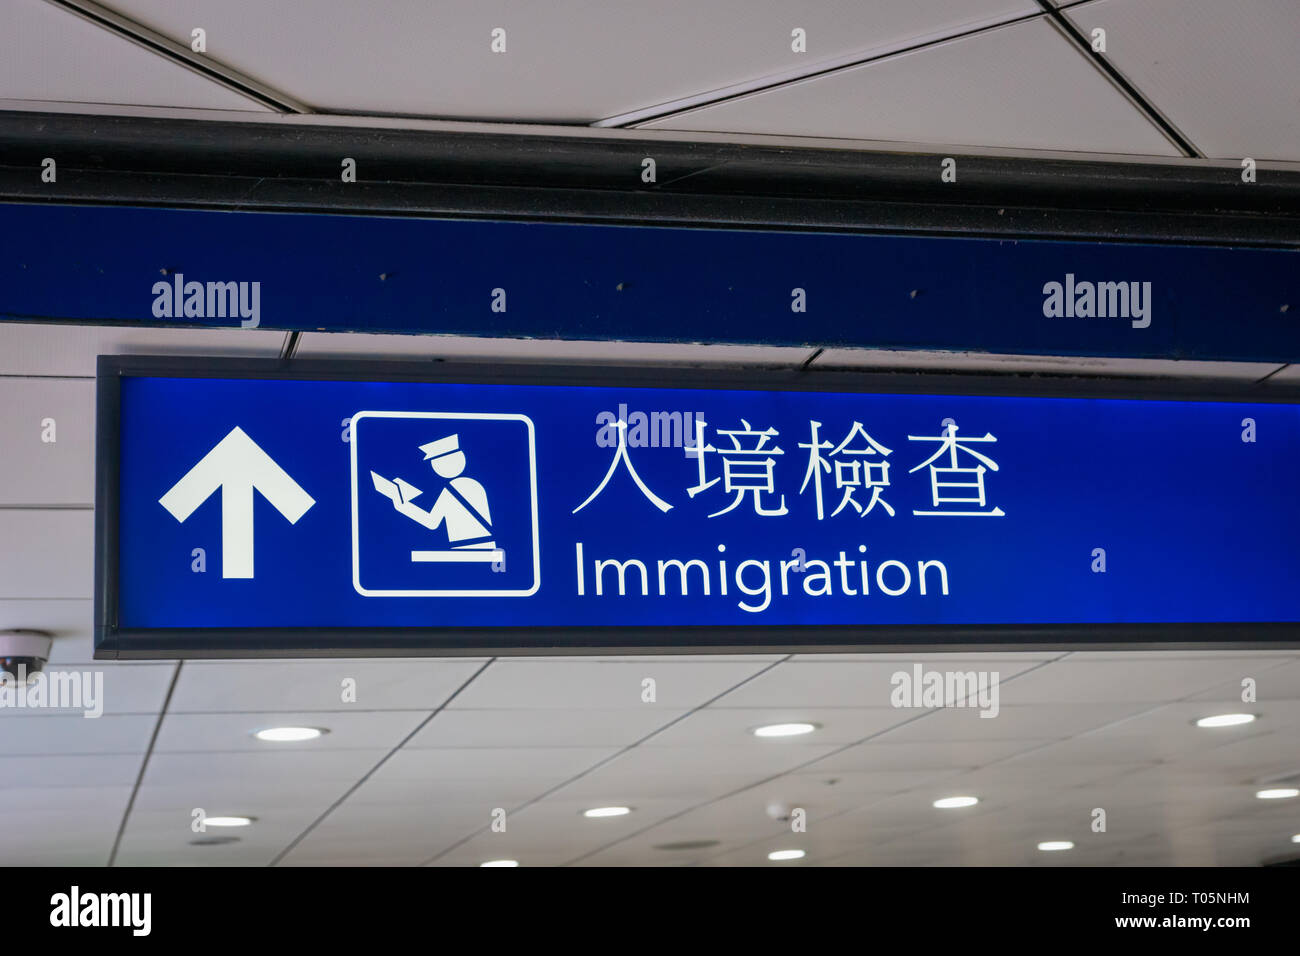 Airport immigration icon and signboard in English and Chinese characters Stock Photo